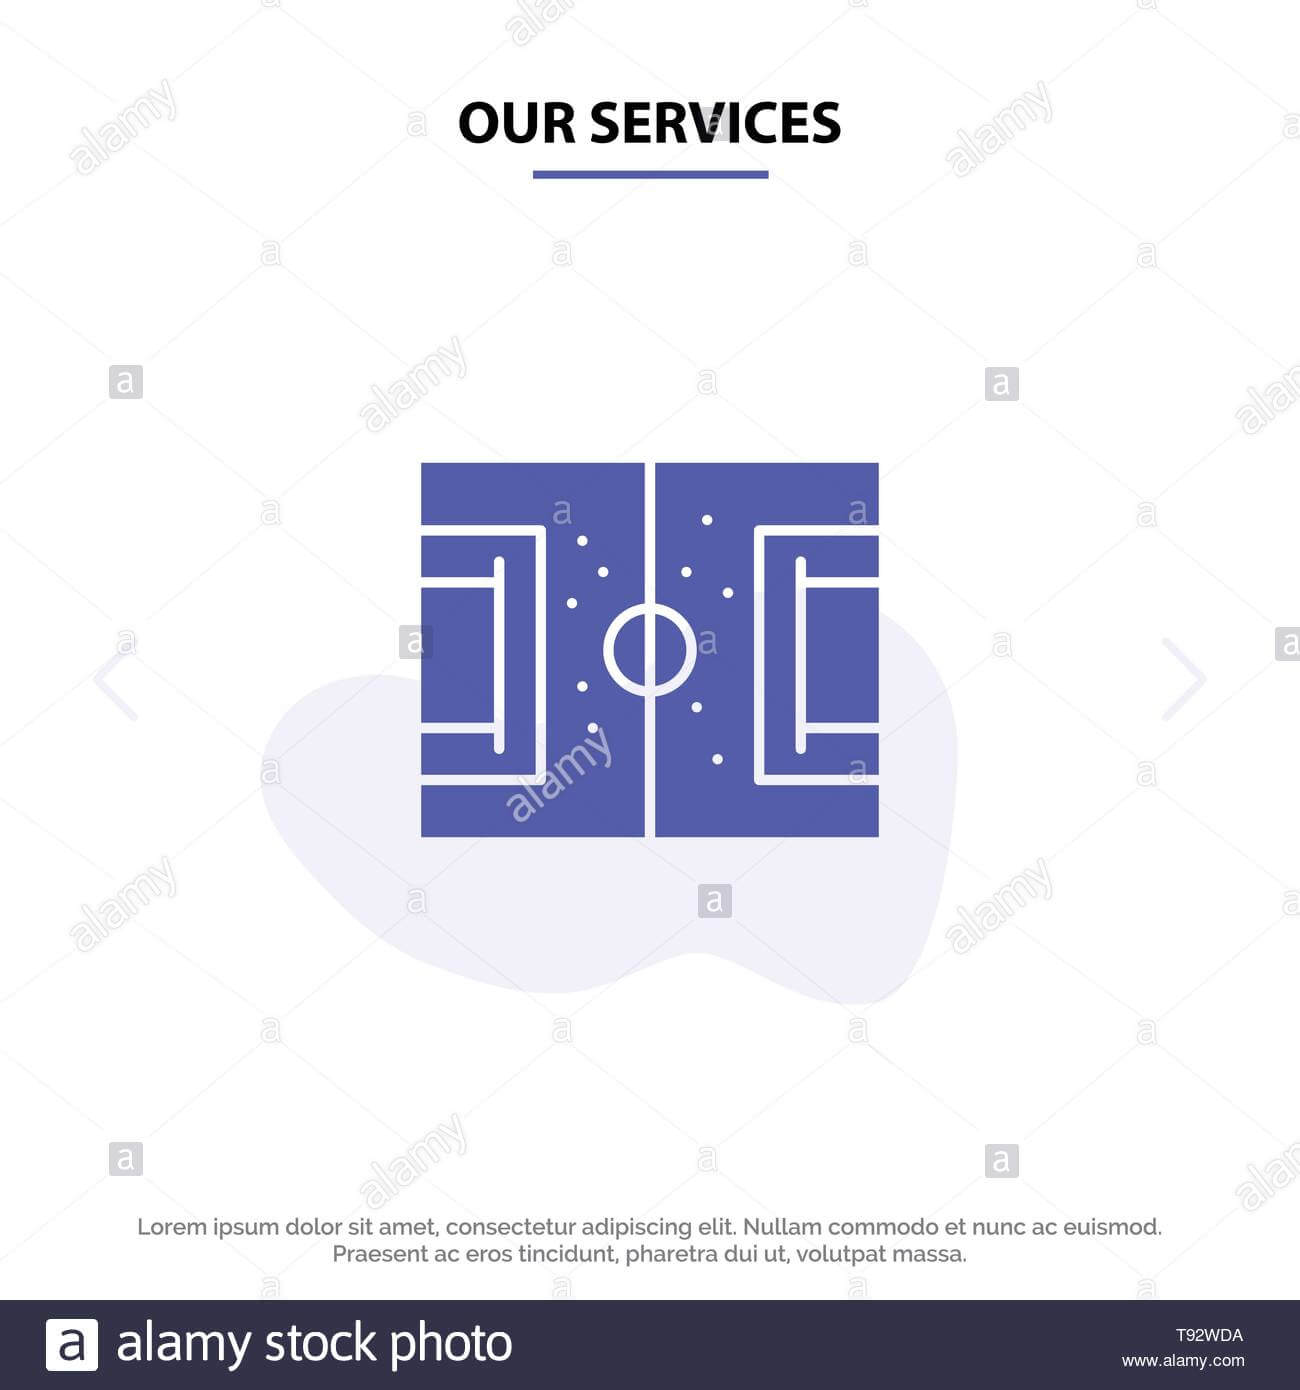 Our Services Field, Football, Game, Pitch, Soccer Solid In Soccer Referee Game Card Template